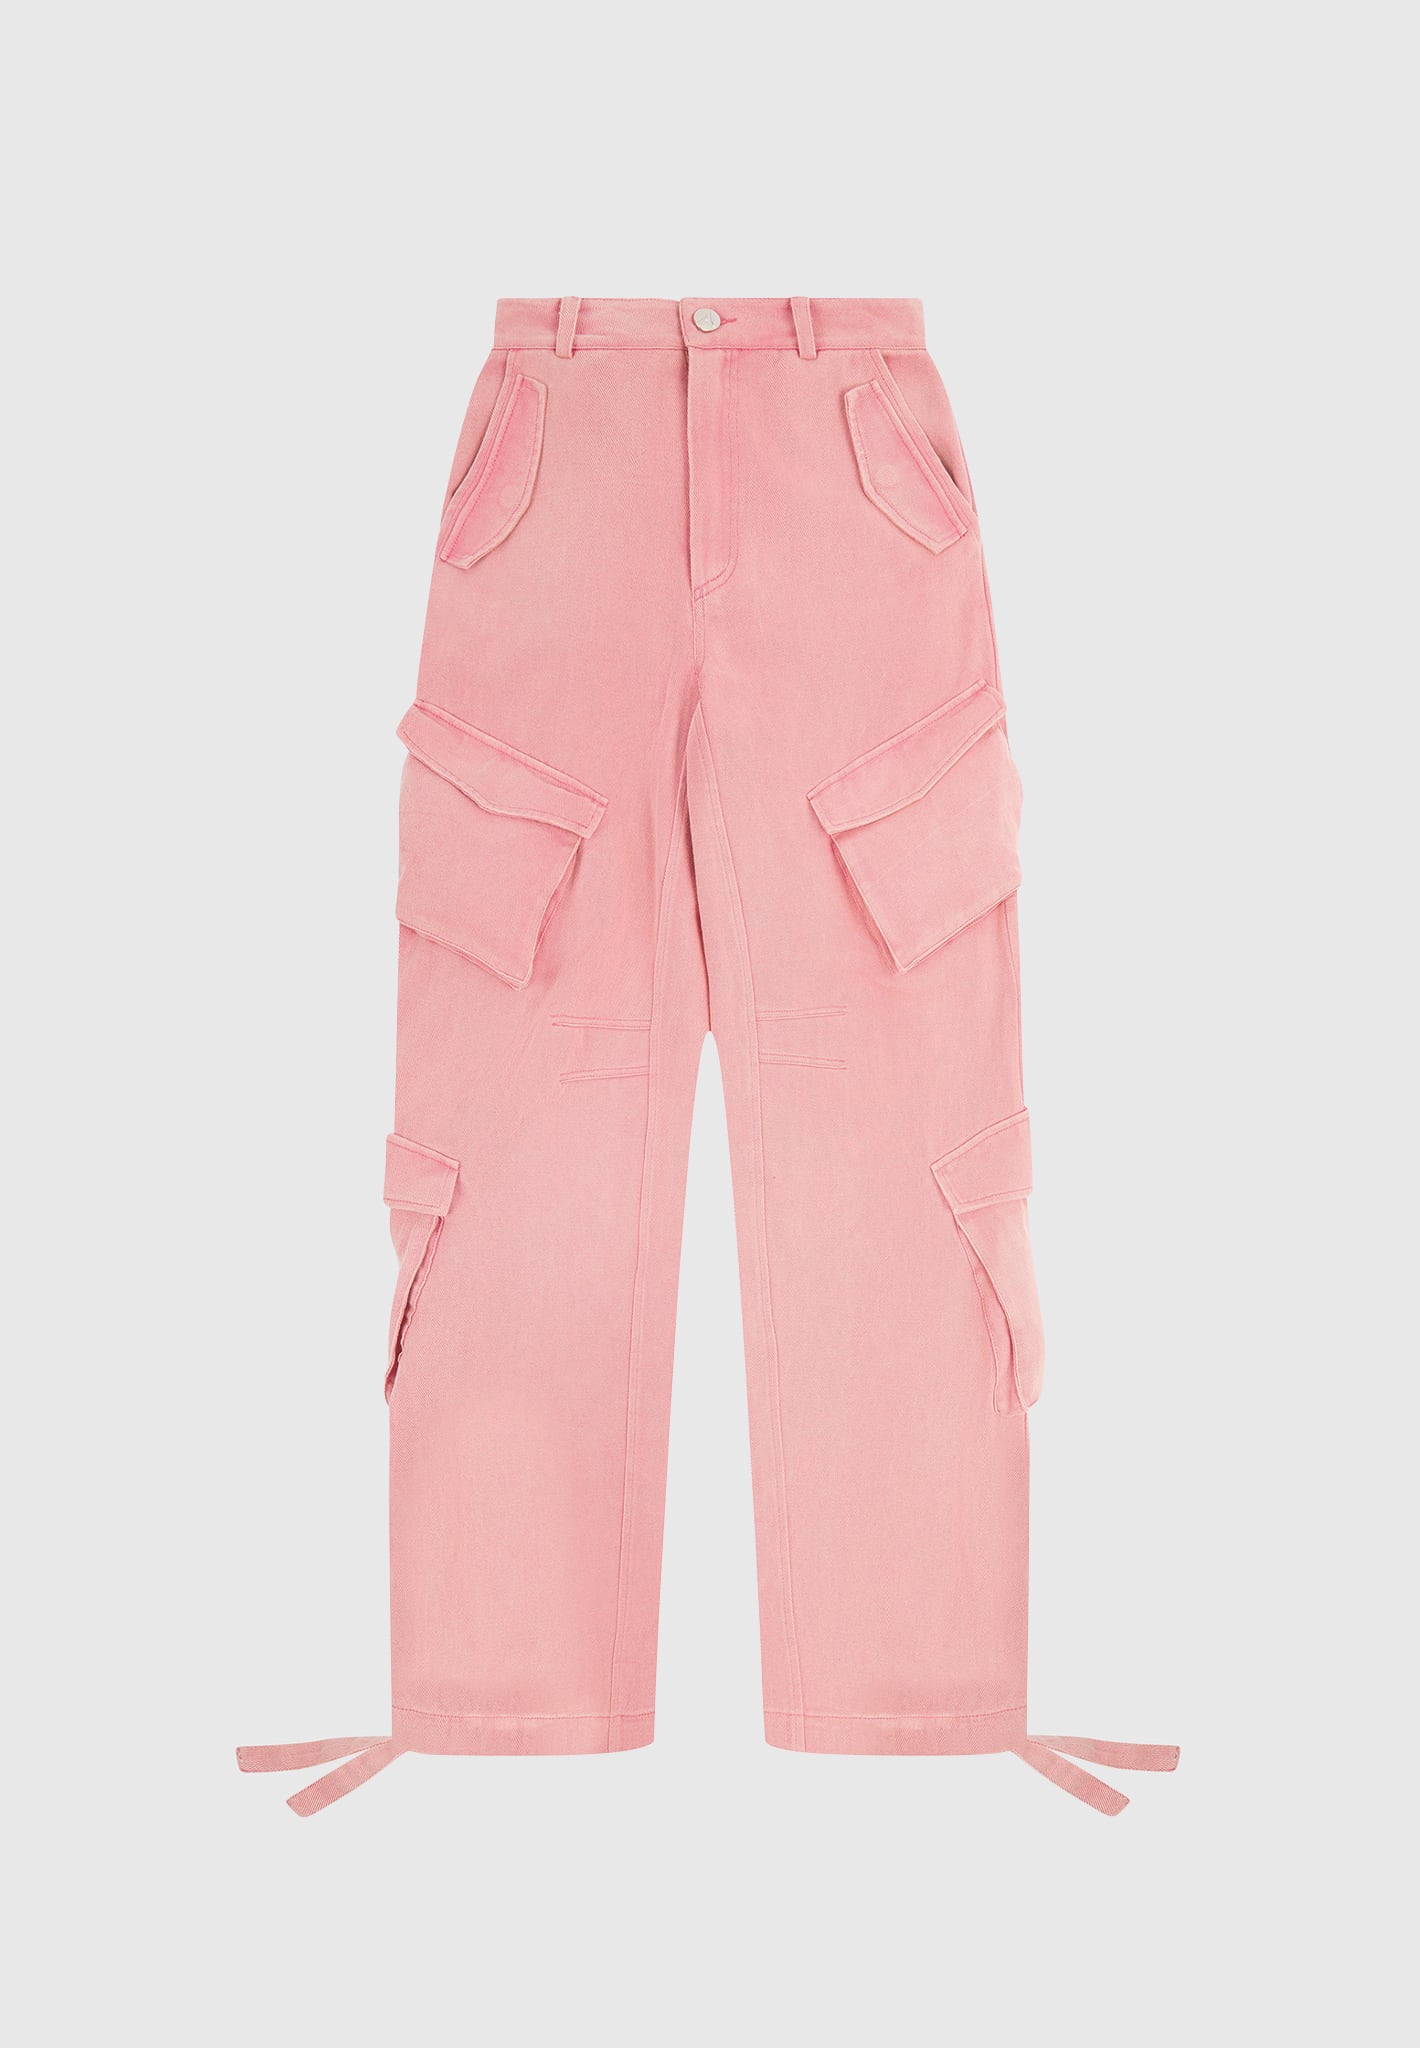 LEVIS NWT High Waisted Cargo Pants Cotton Light Peach/Pink Size 33